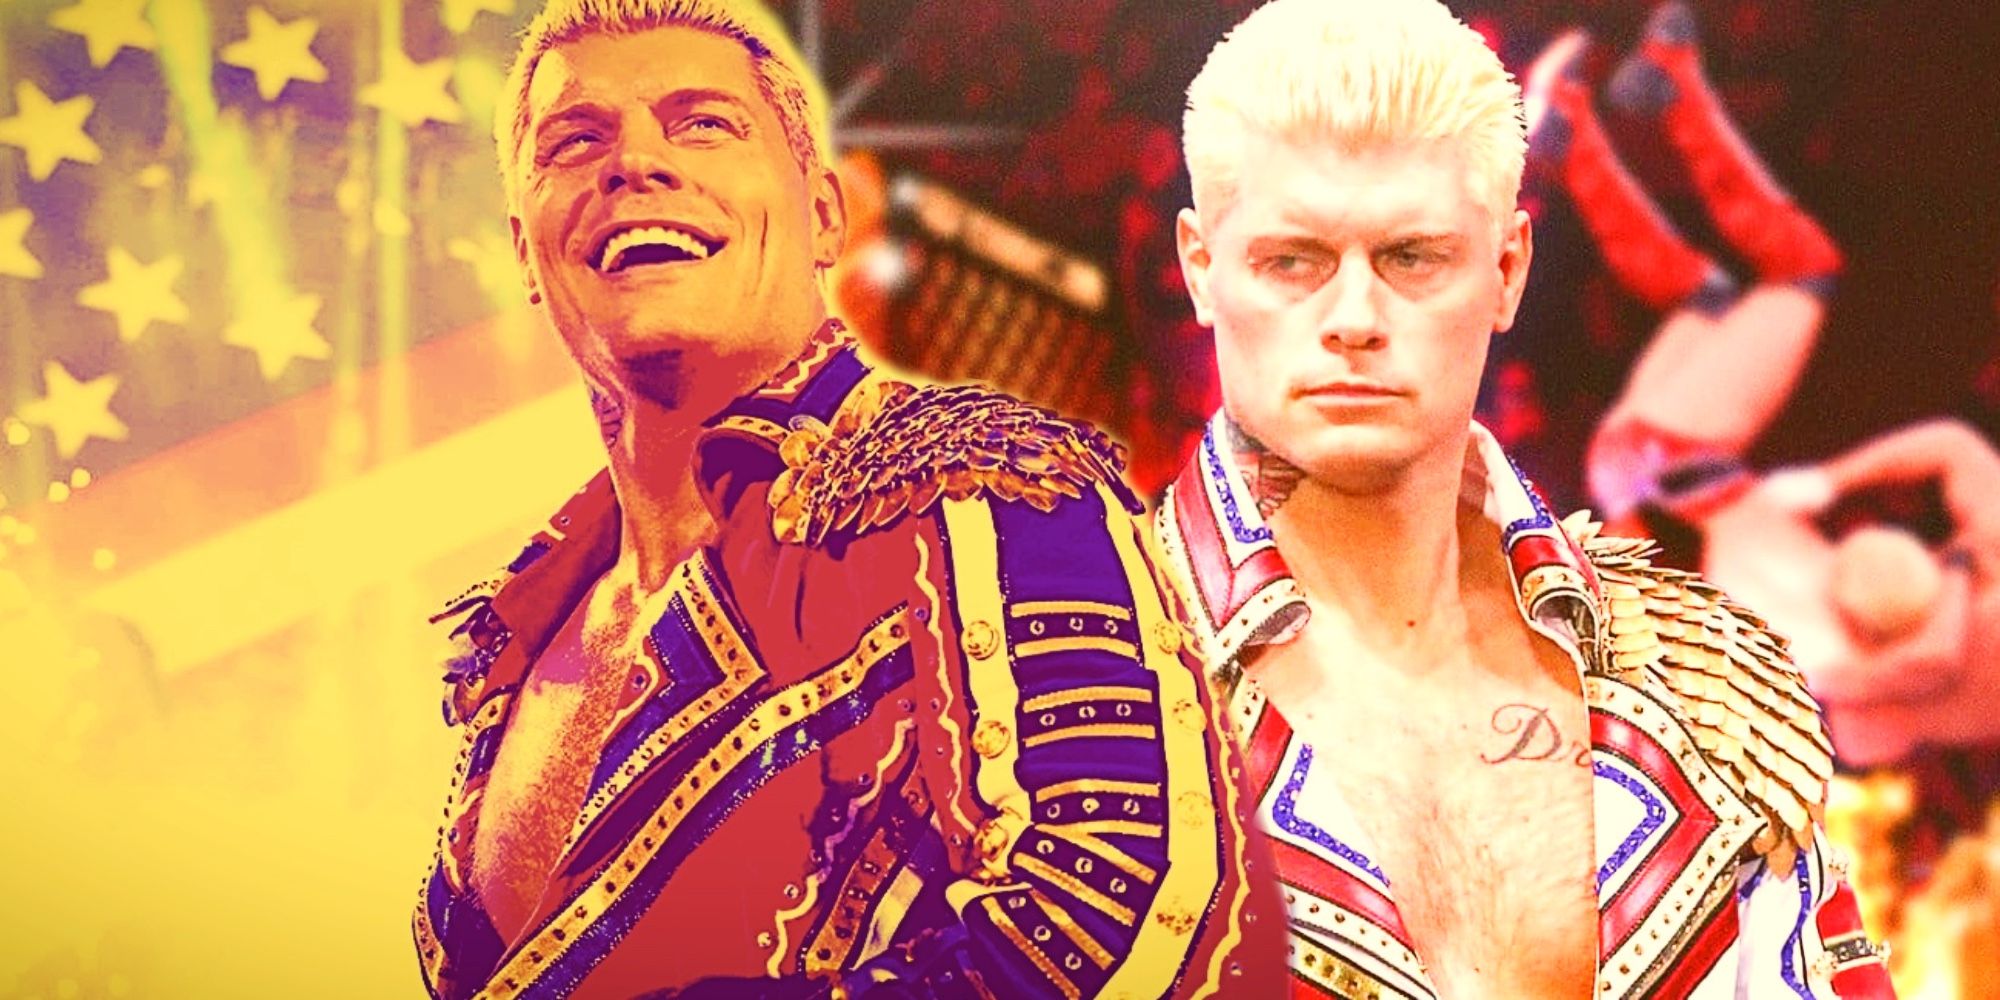 why Cody rhodes' creative stands out among blland wwe storylines